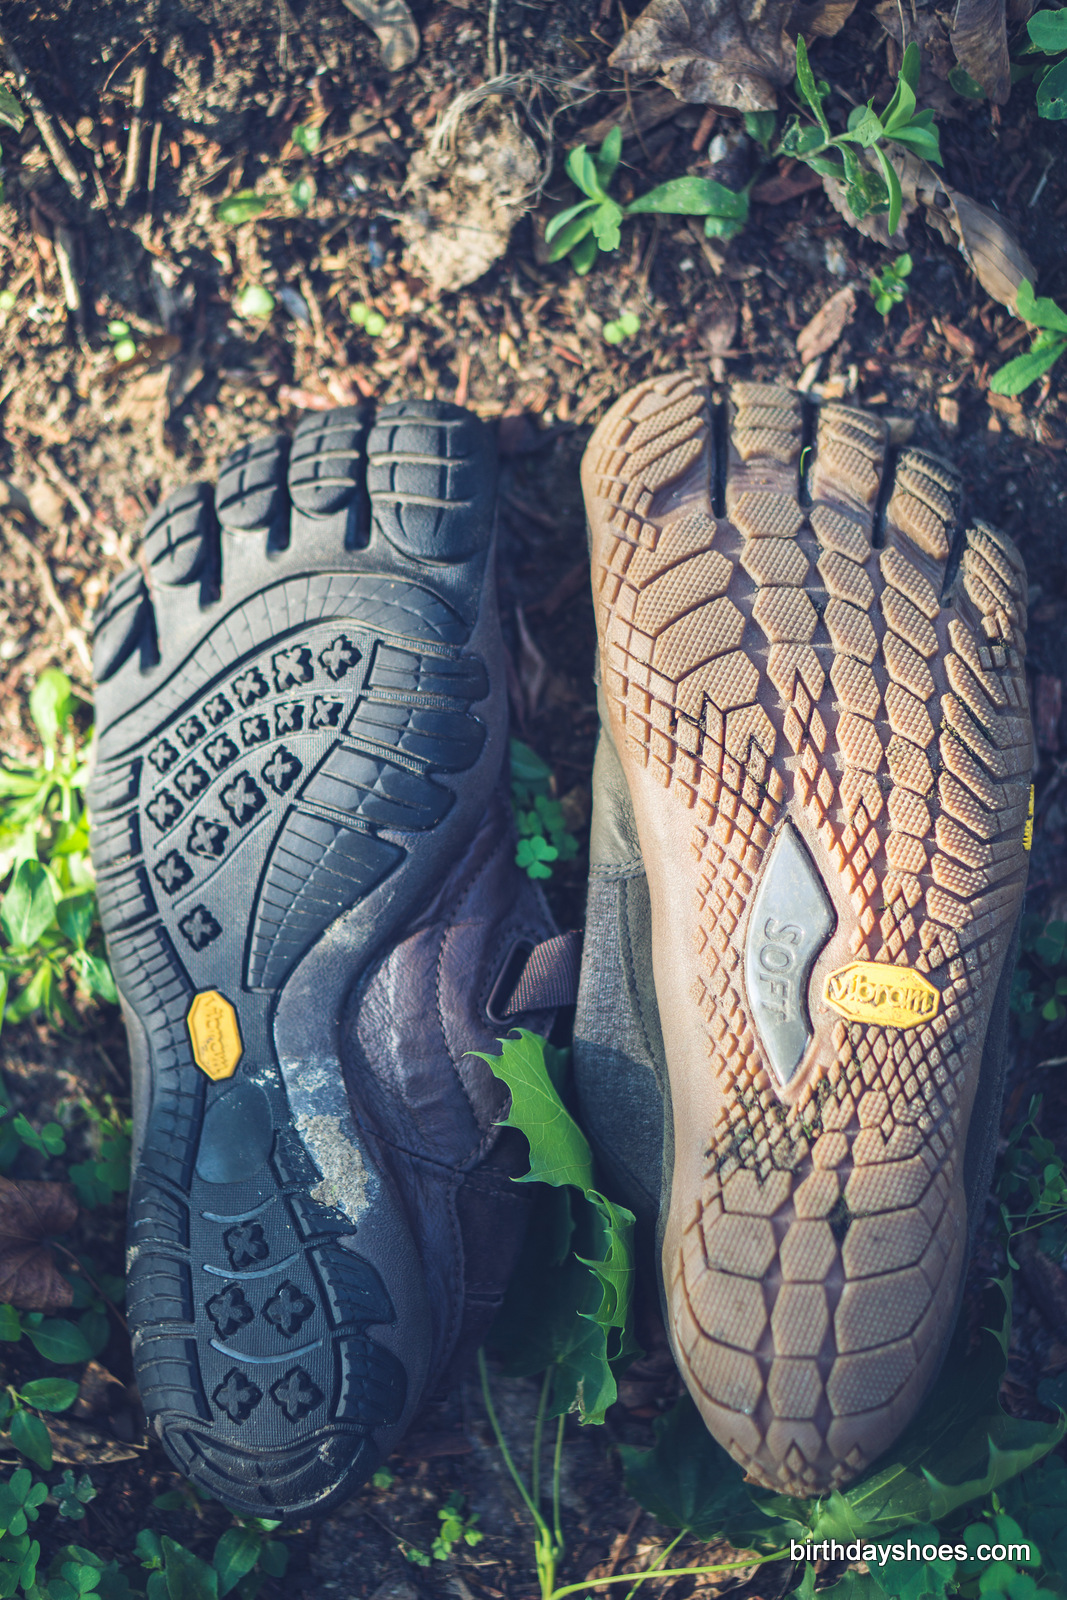 A side-by-side comparison of the soles of the old KSO Trek (left) and the new Trek Ascent LR (right). Note the more aggressive sole design in the Trek Ascent